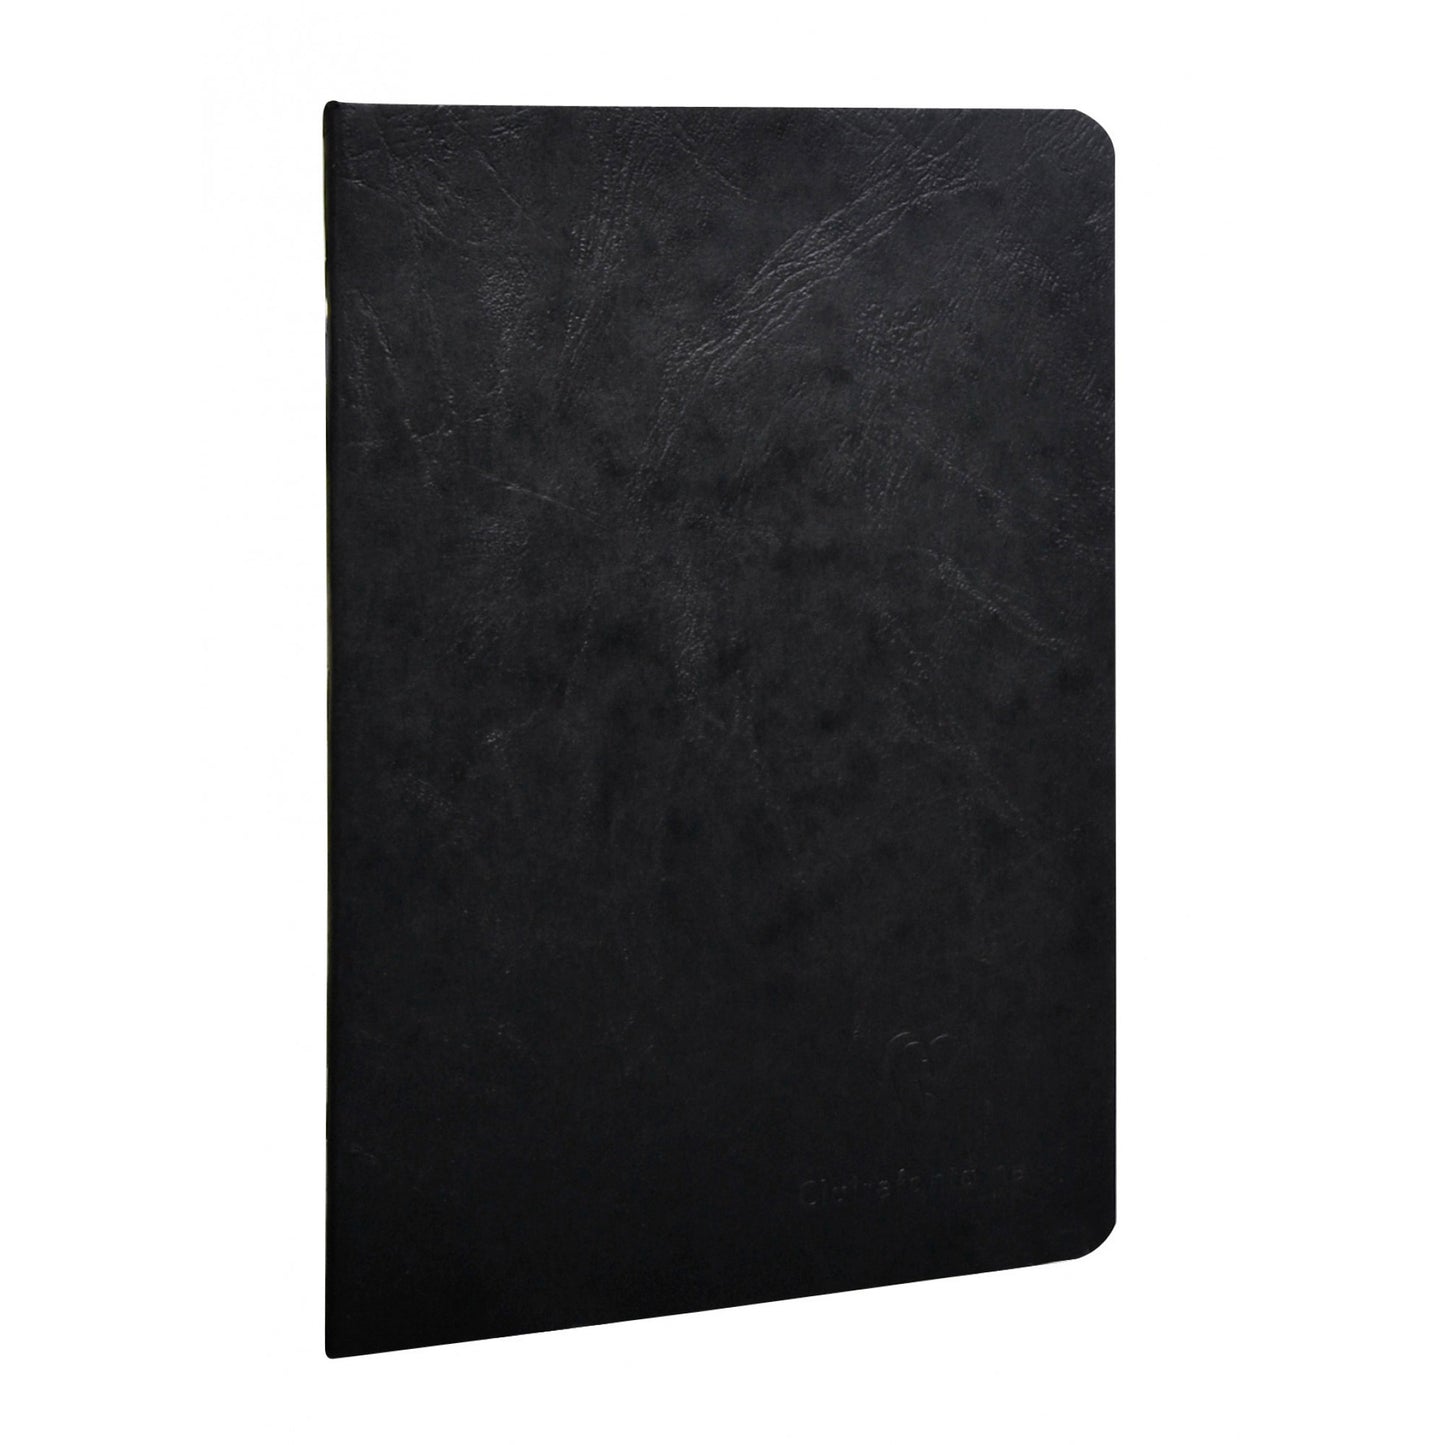 Clairefontaine #733161 Life. unplugged Lined Staplebound Notebook (5.75 x 8.25) - Black